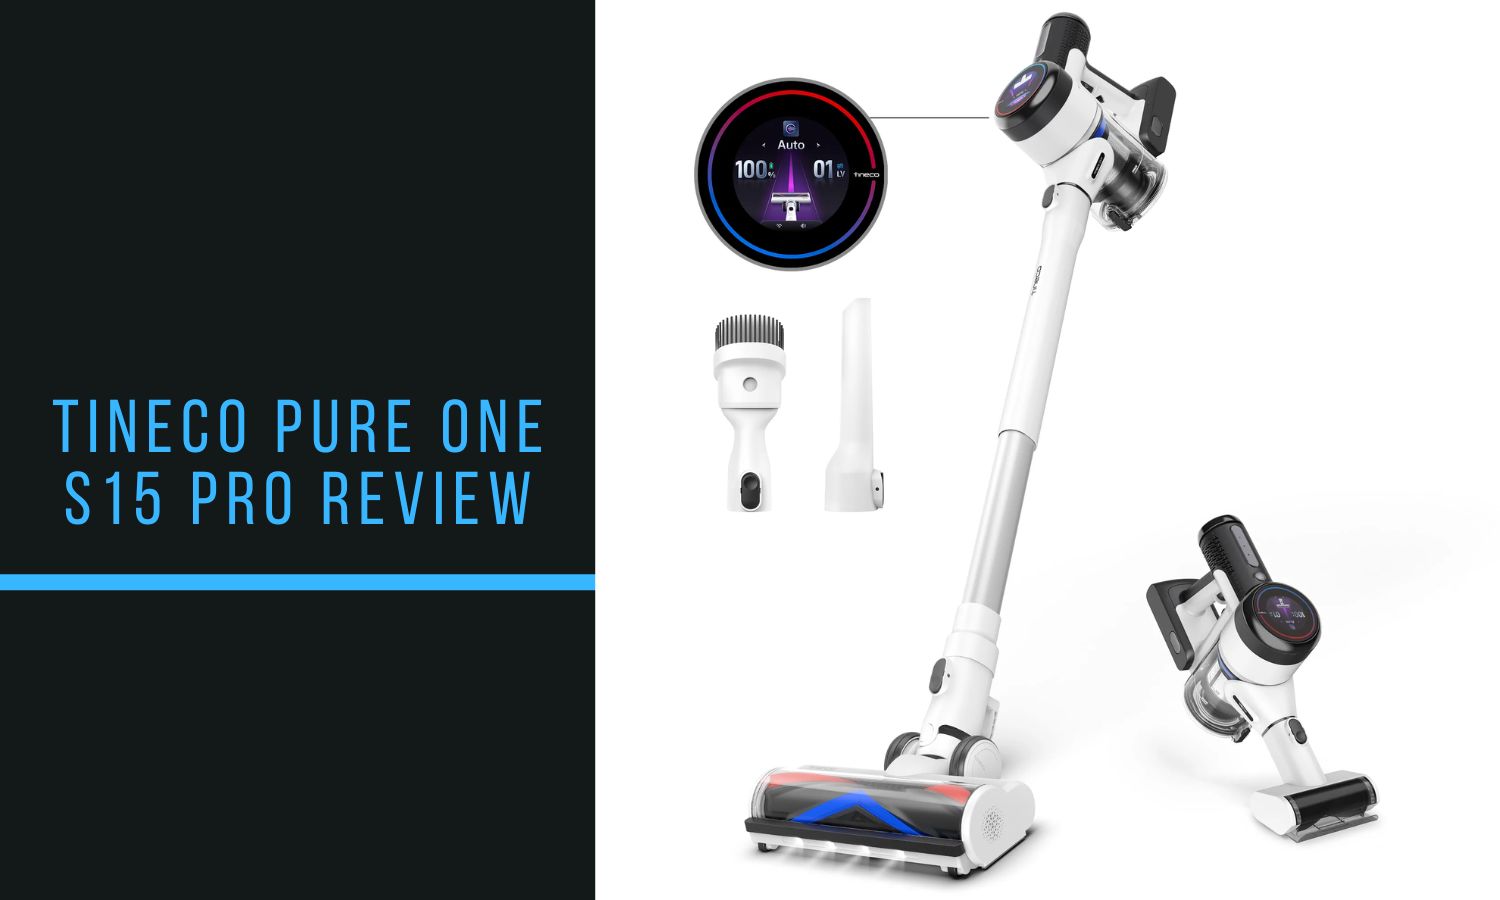 Tineco PURE ONE S15 PRO Smart Cordless Stick Vacuum Cleaner Review